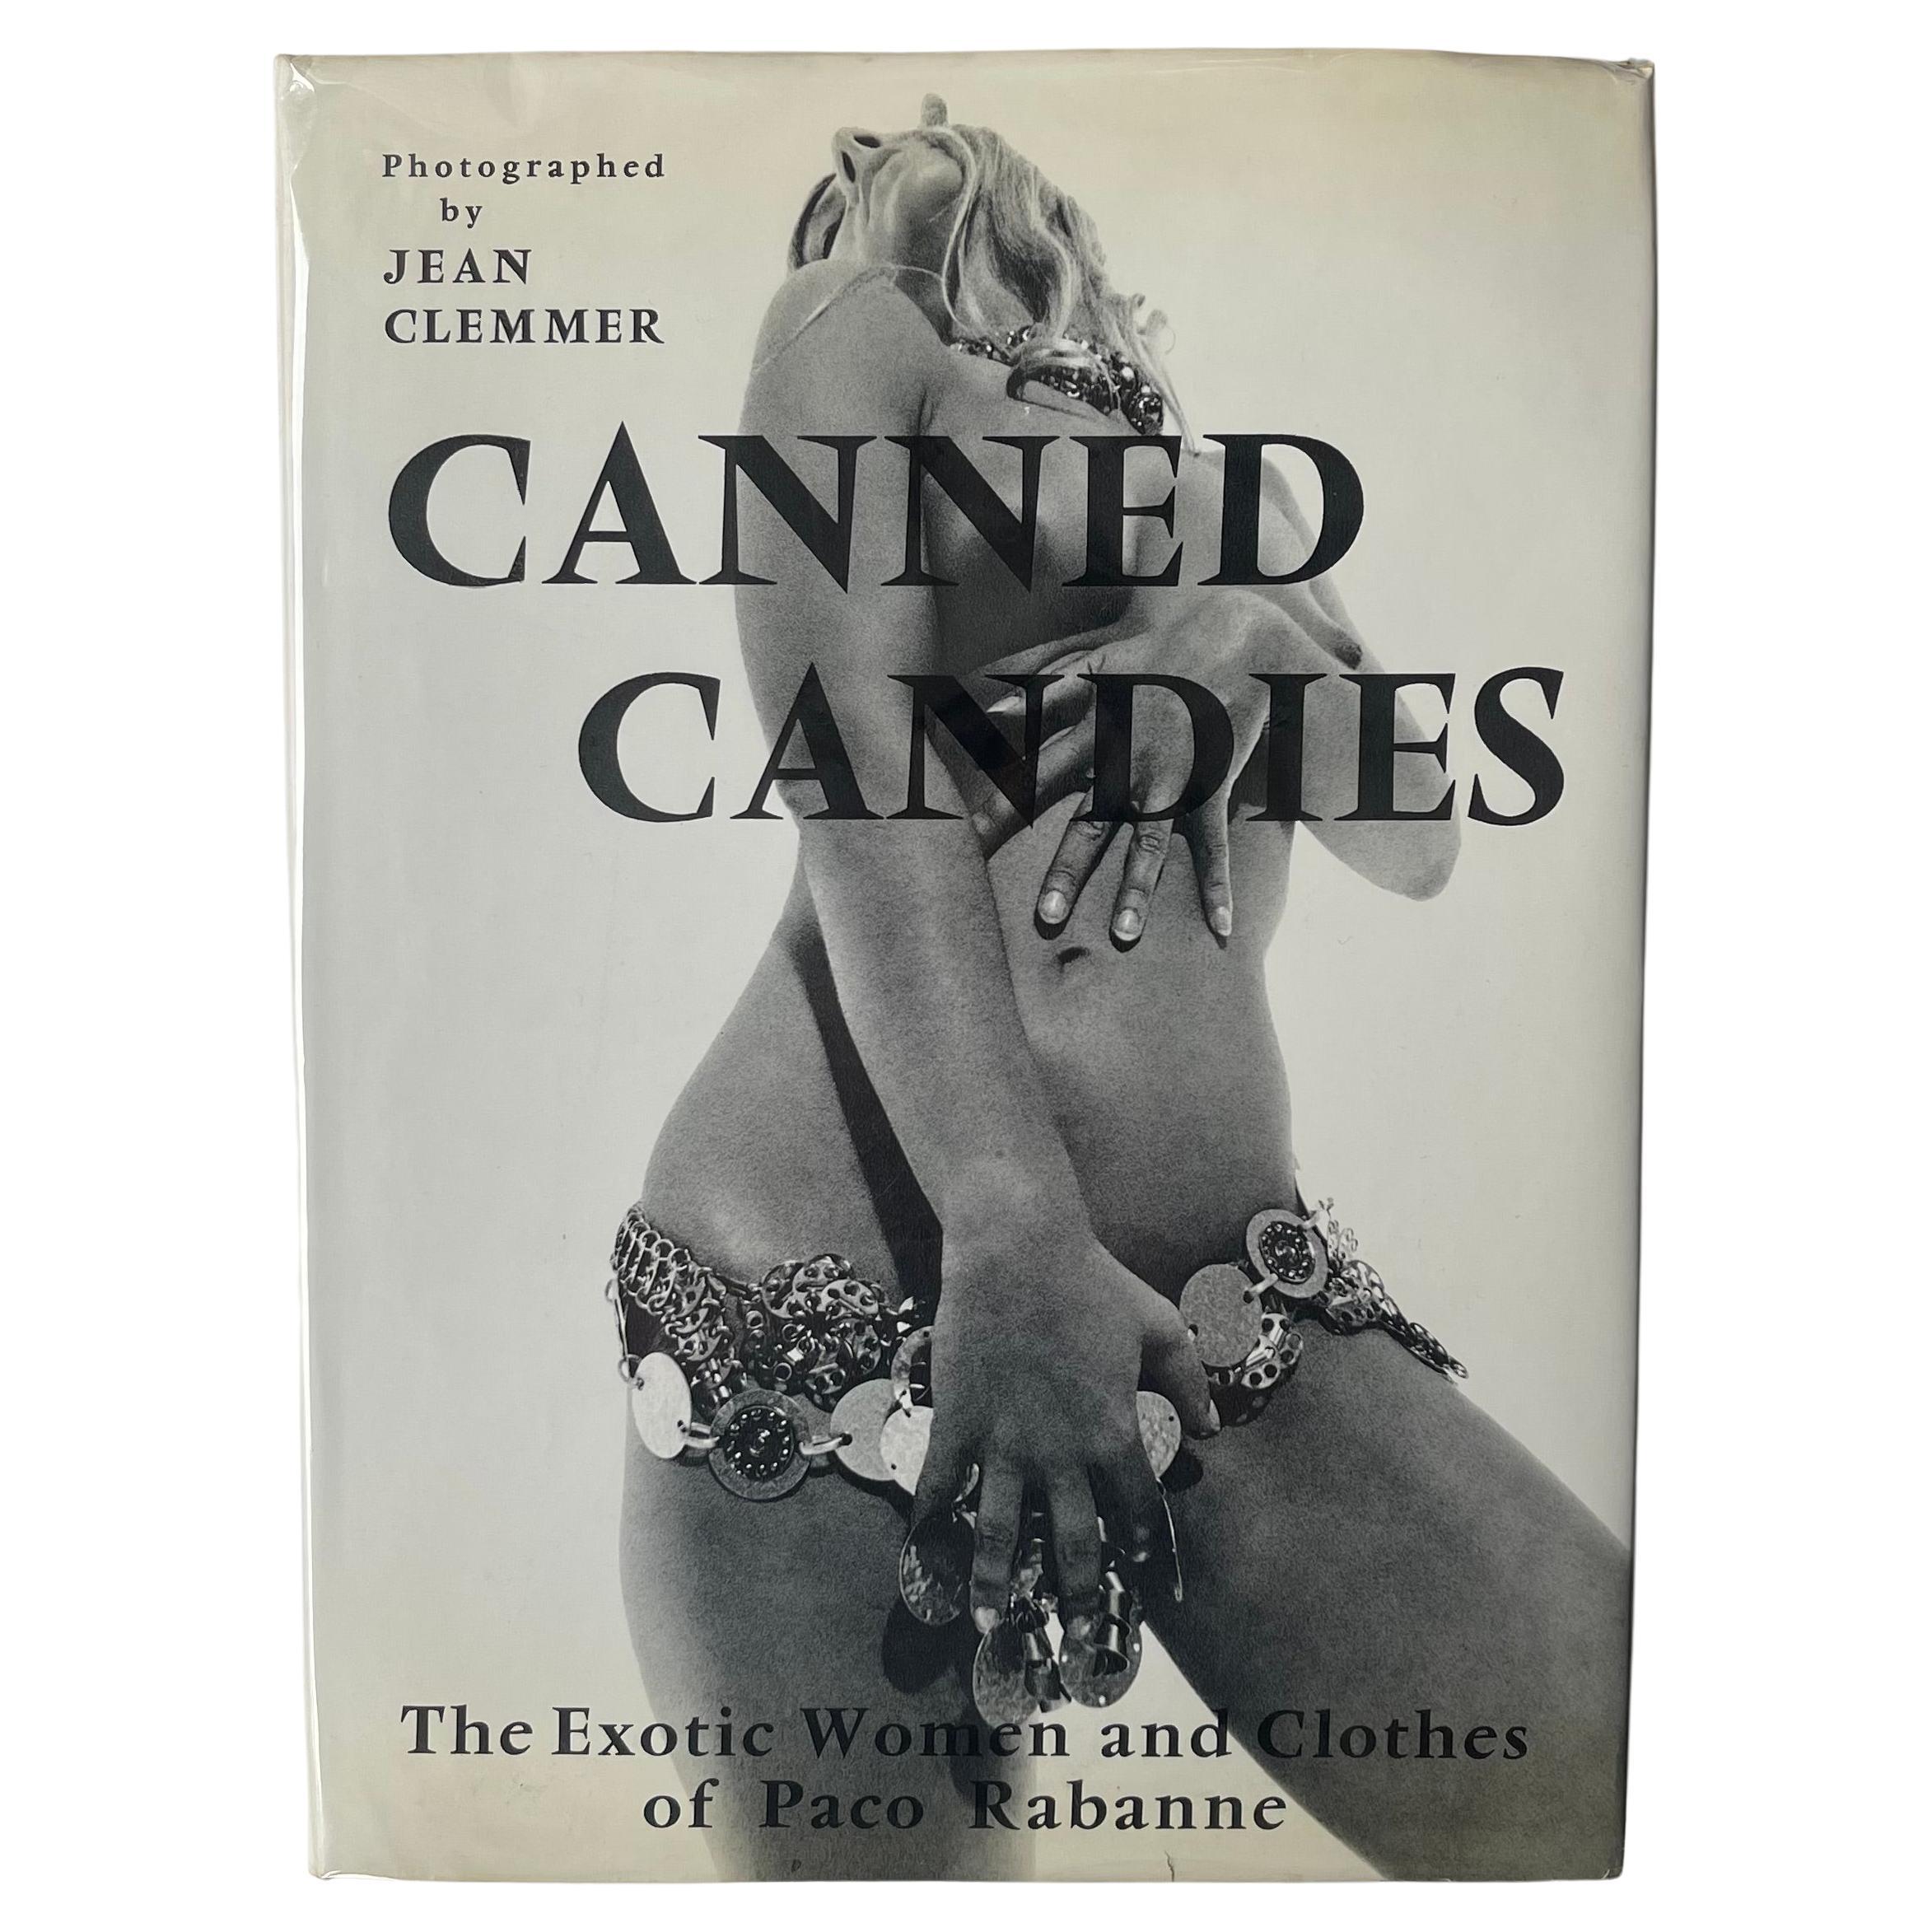 Canned Candies, The Exotic Women and Clothes of Paco Rabanne by Jean Clemmer 